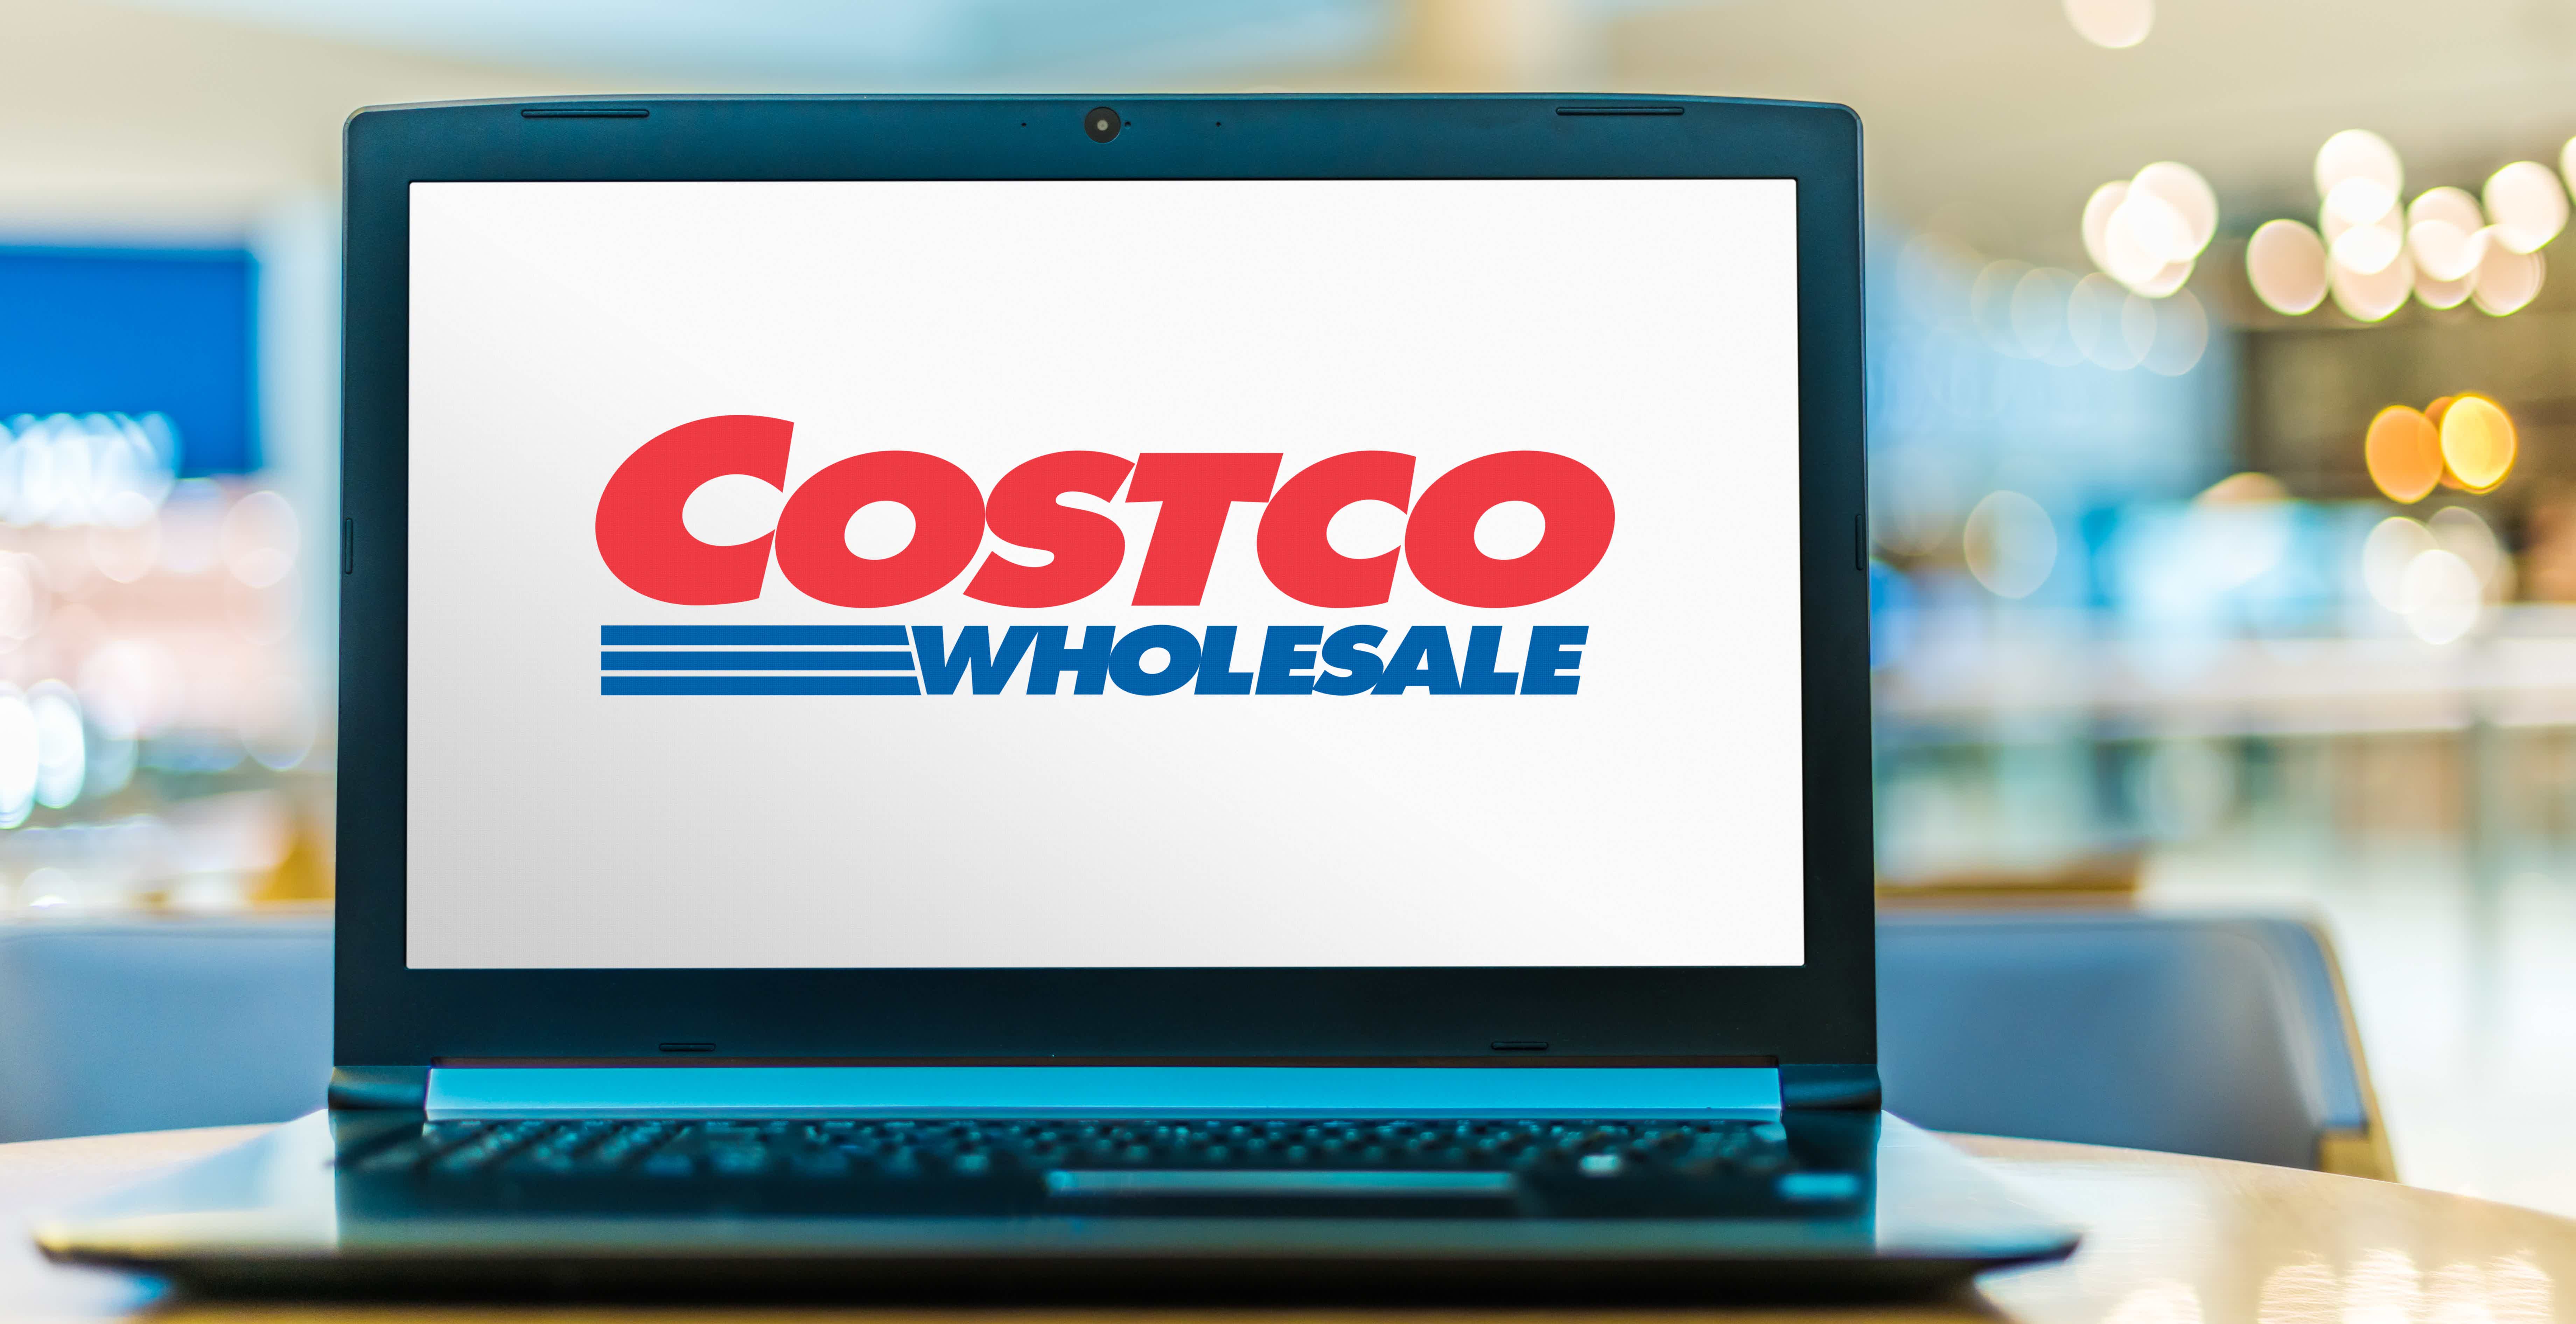 Get your Costco membership and then apply at the Citi website for this card. Source: Adobe Stock.